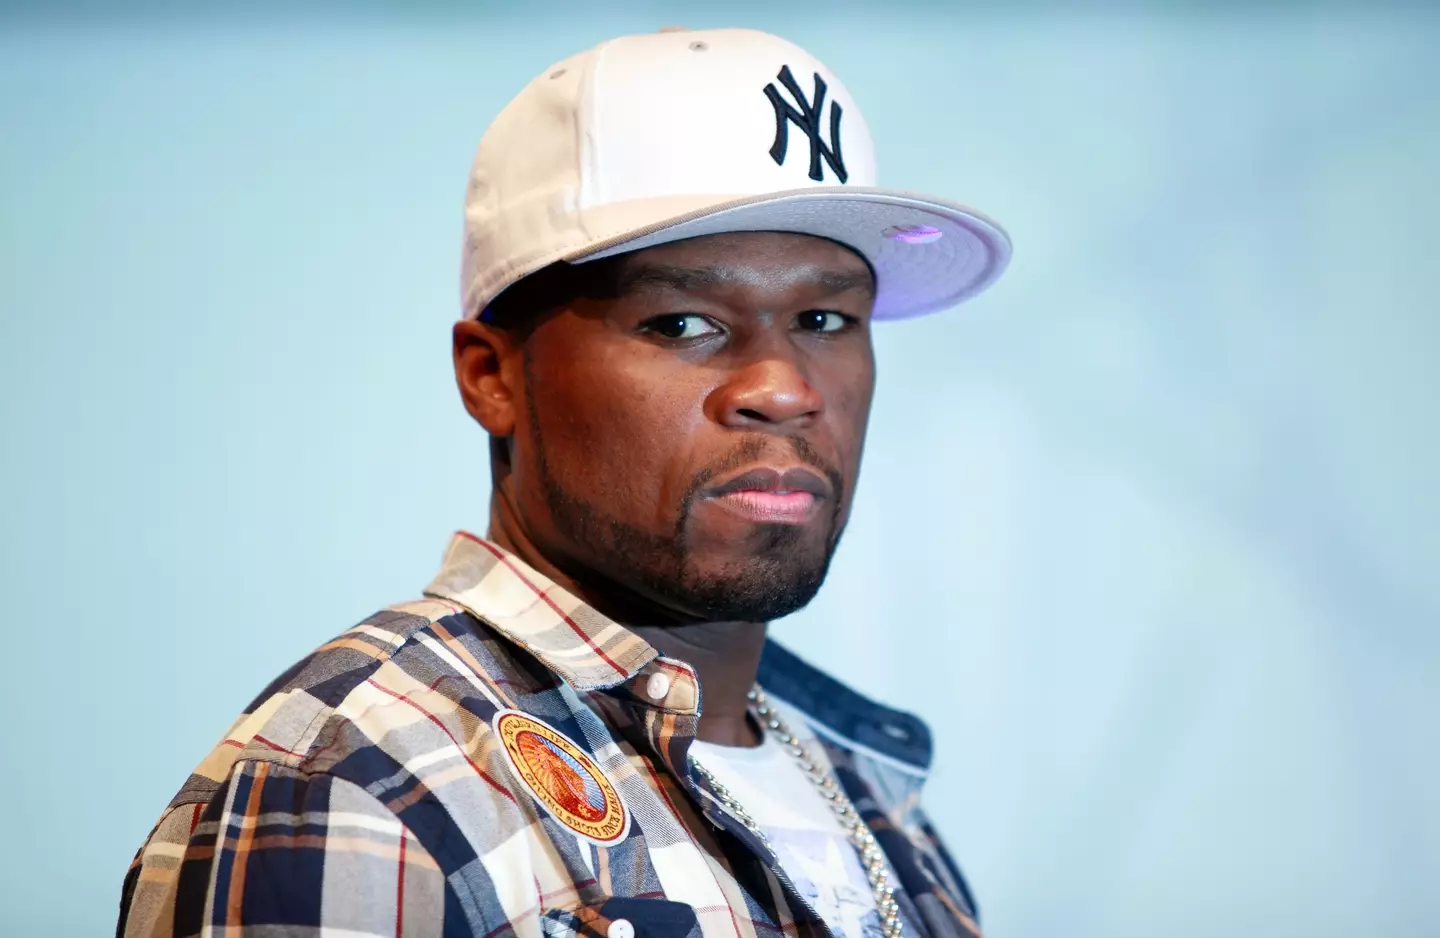 50 Cent said he'd give Eminem the bulk of the payment.